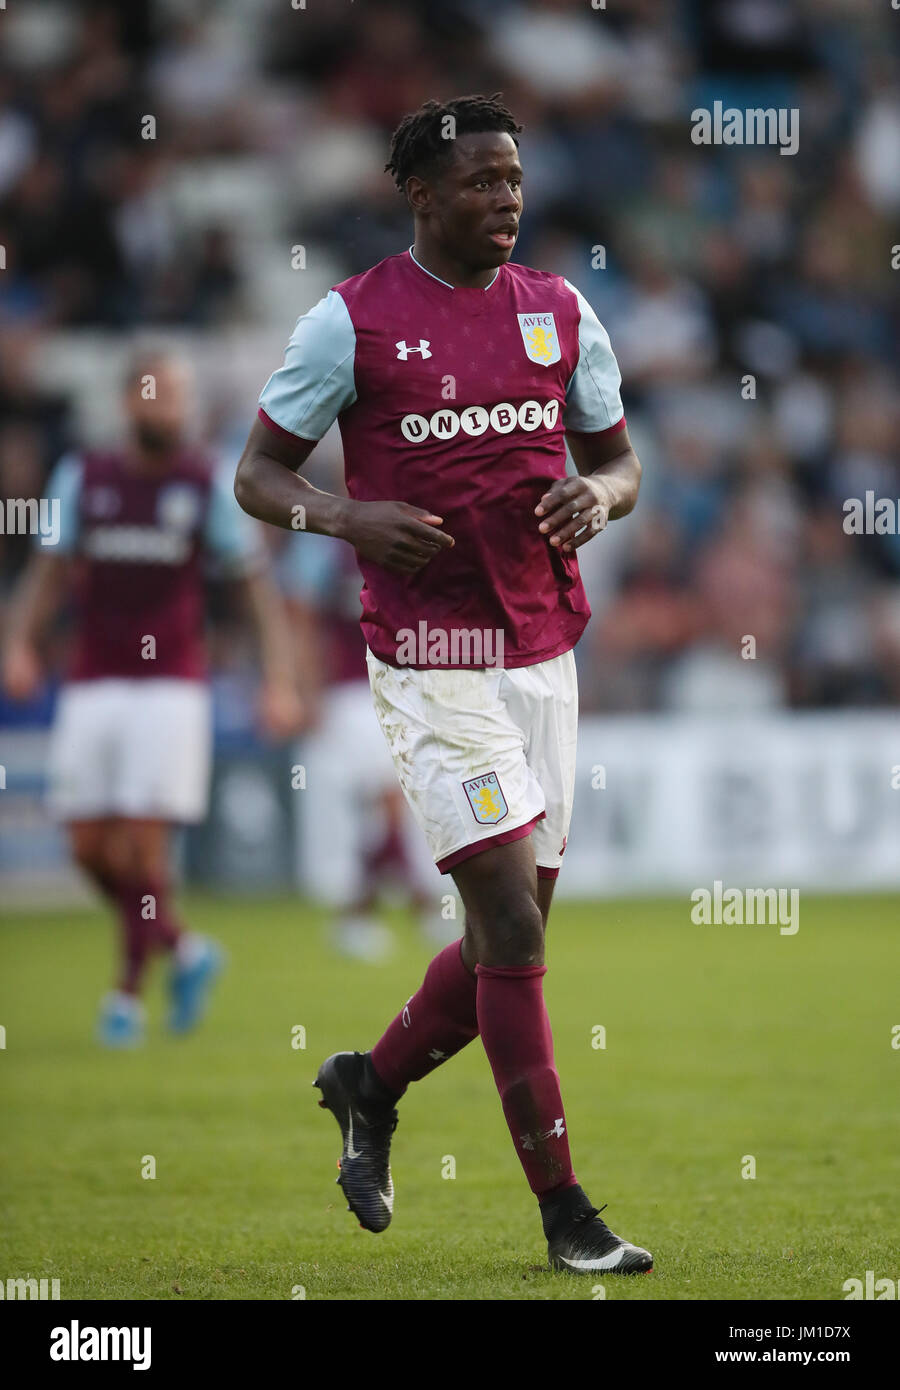 Aston Villa's Keenan Davies during the pre-season friendly at New Bucks Head, Telford. PRESS ASSOCIATION Photo. Picture date: Wednesday July 12, 2017. Photo credit should read: Nick Potts/PA Wire. RESTRICTIONS: No use with unauthorised audio, video, data, fixture lists, club/league logos or 'live' services. Online in-match use limited to 75 images, no video emulation. No use in betting, games or single club/league/player publications. Stock Photo